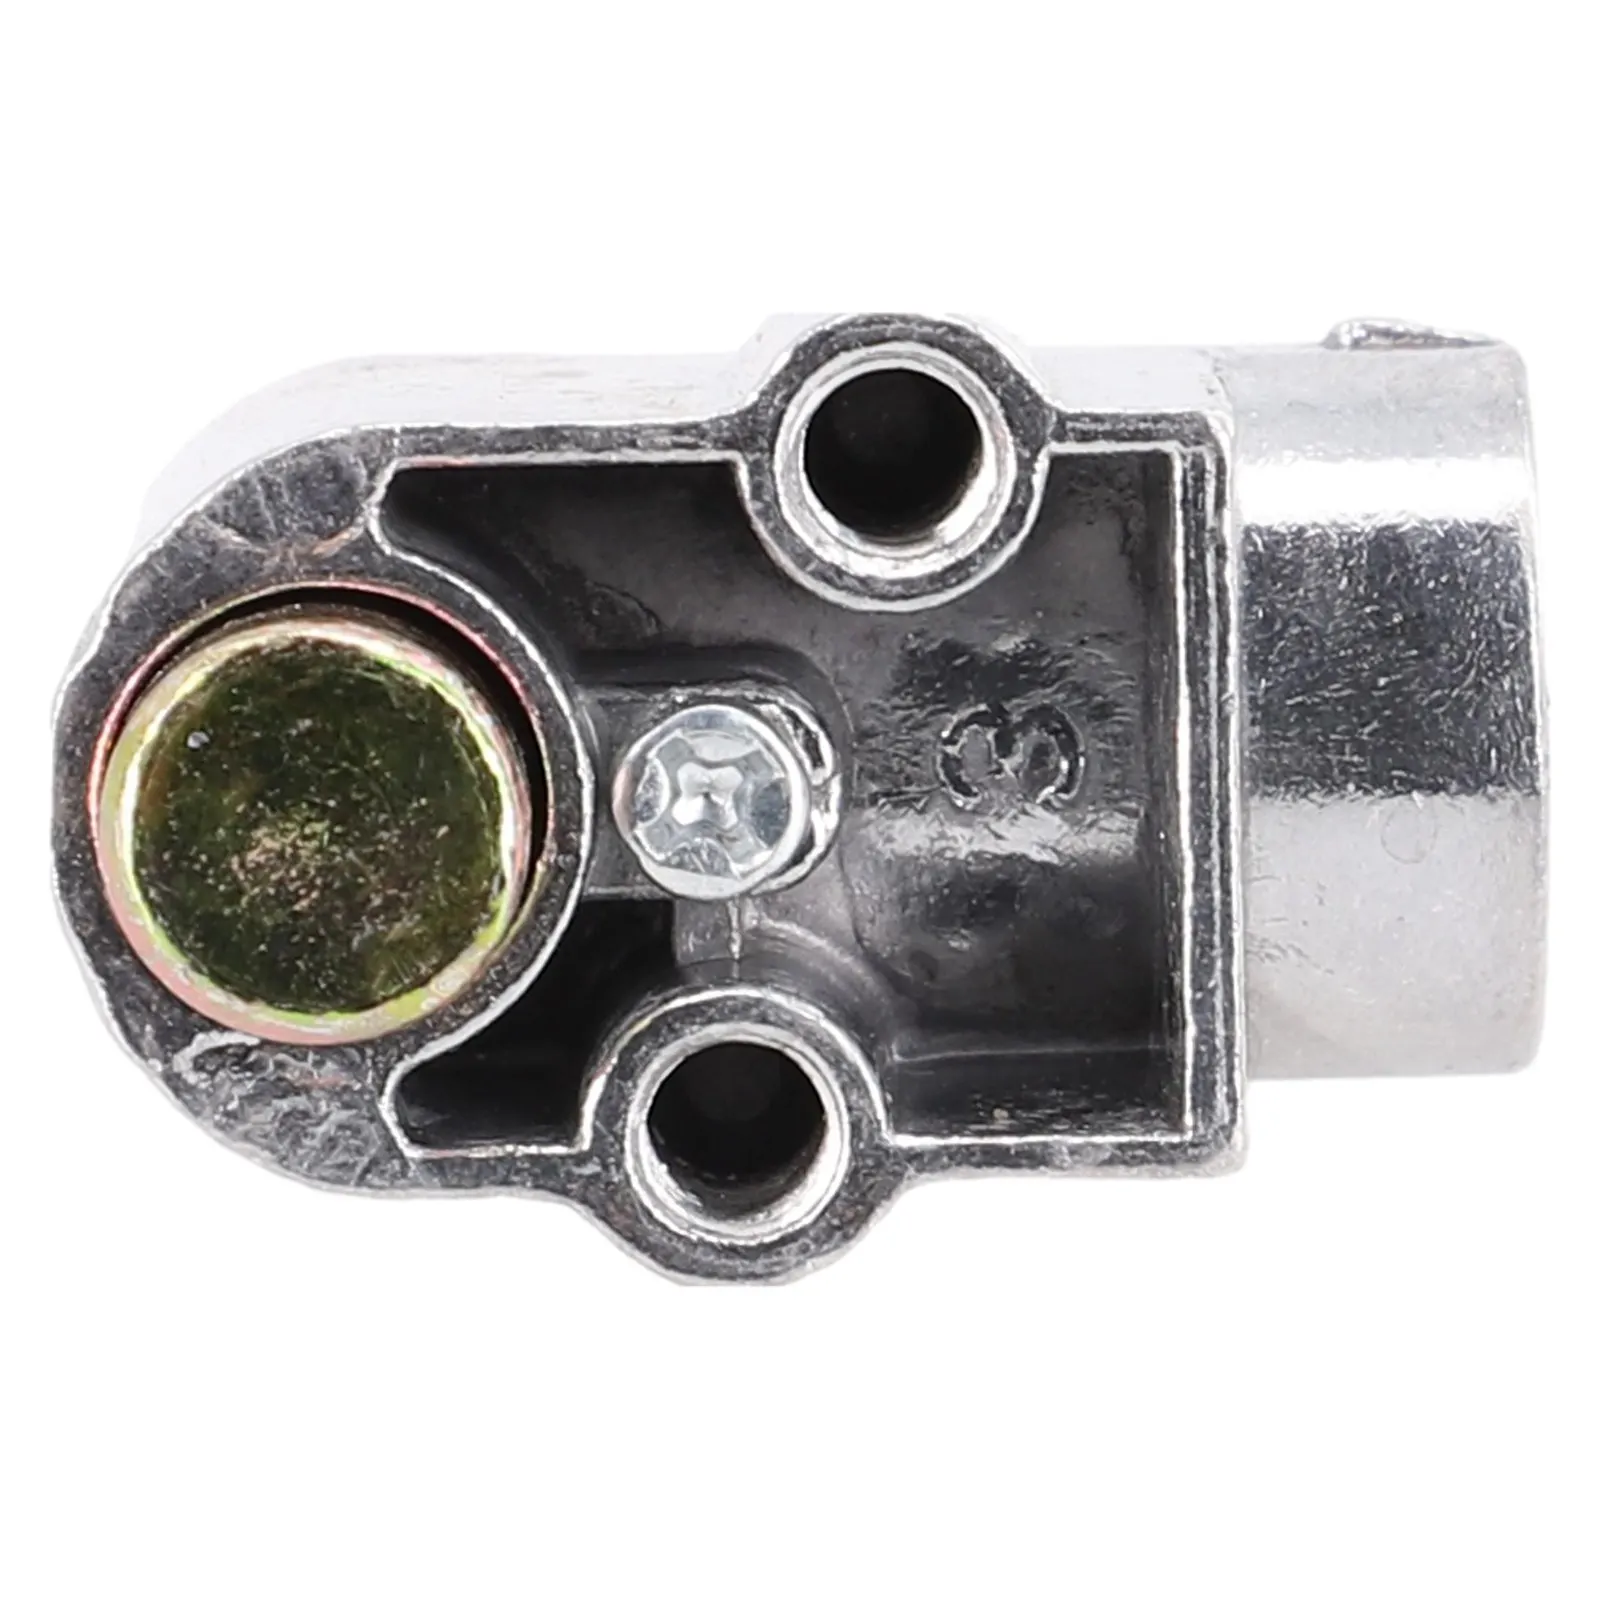 

Ignition Switch Battery Safety Lock for Motorcycle Electric eBike Scooter, Metal Material, Cylinder Diameter 10mm, 2 Keys